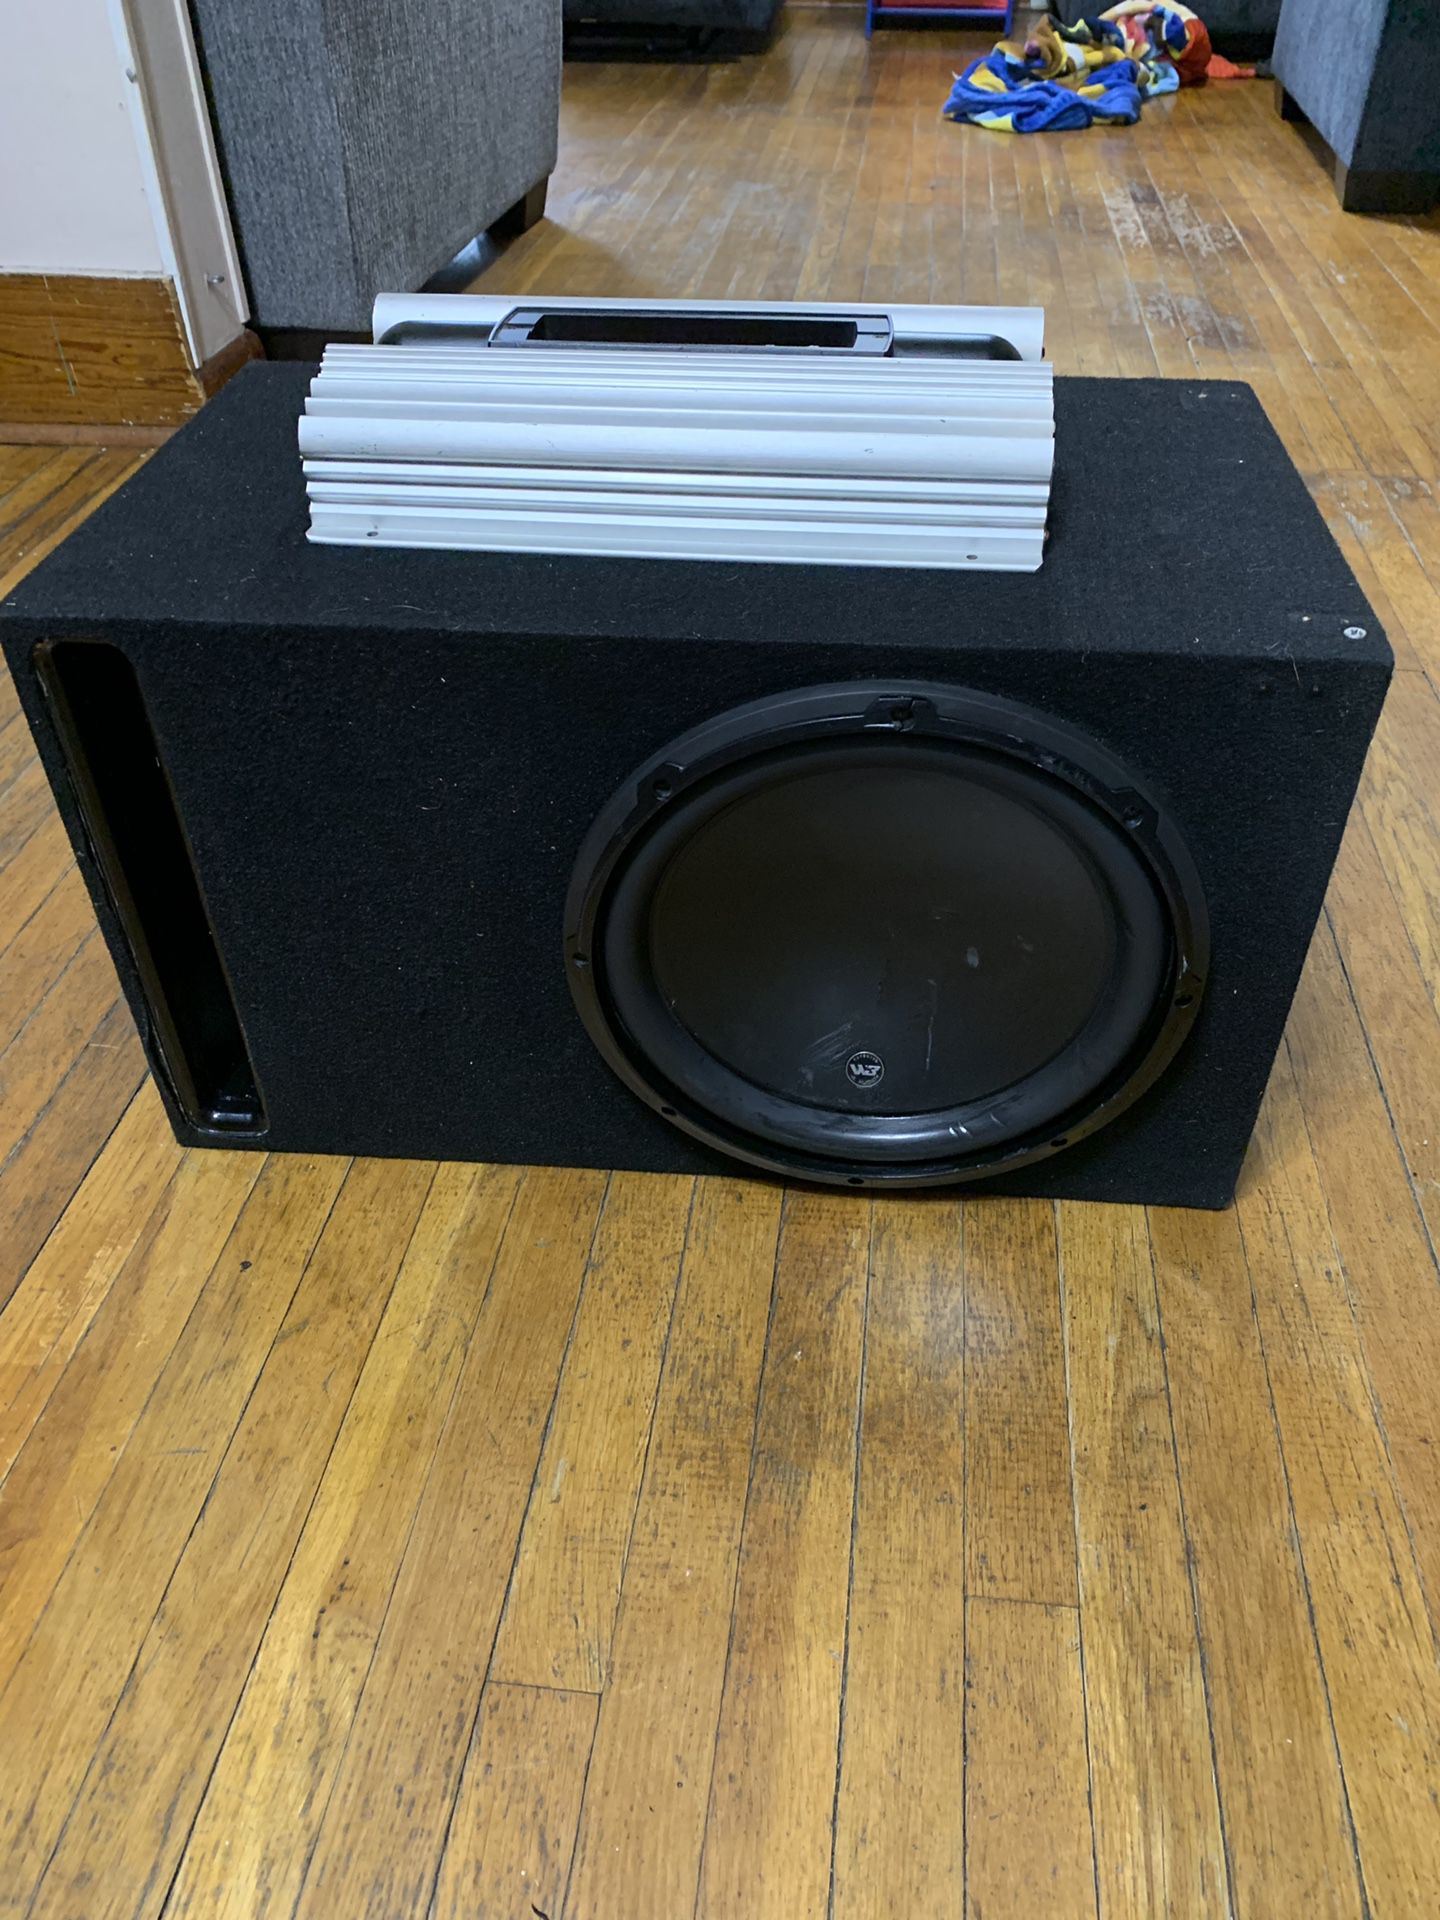 Jl Audio 12w3v3 4 Subwoofer In Ported Box With Amp For Sale In Altoona Pa Offerup